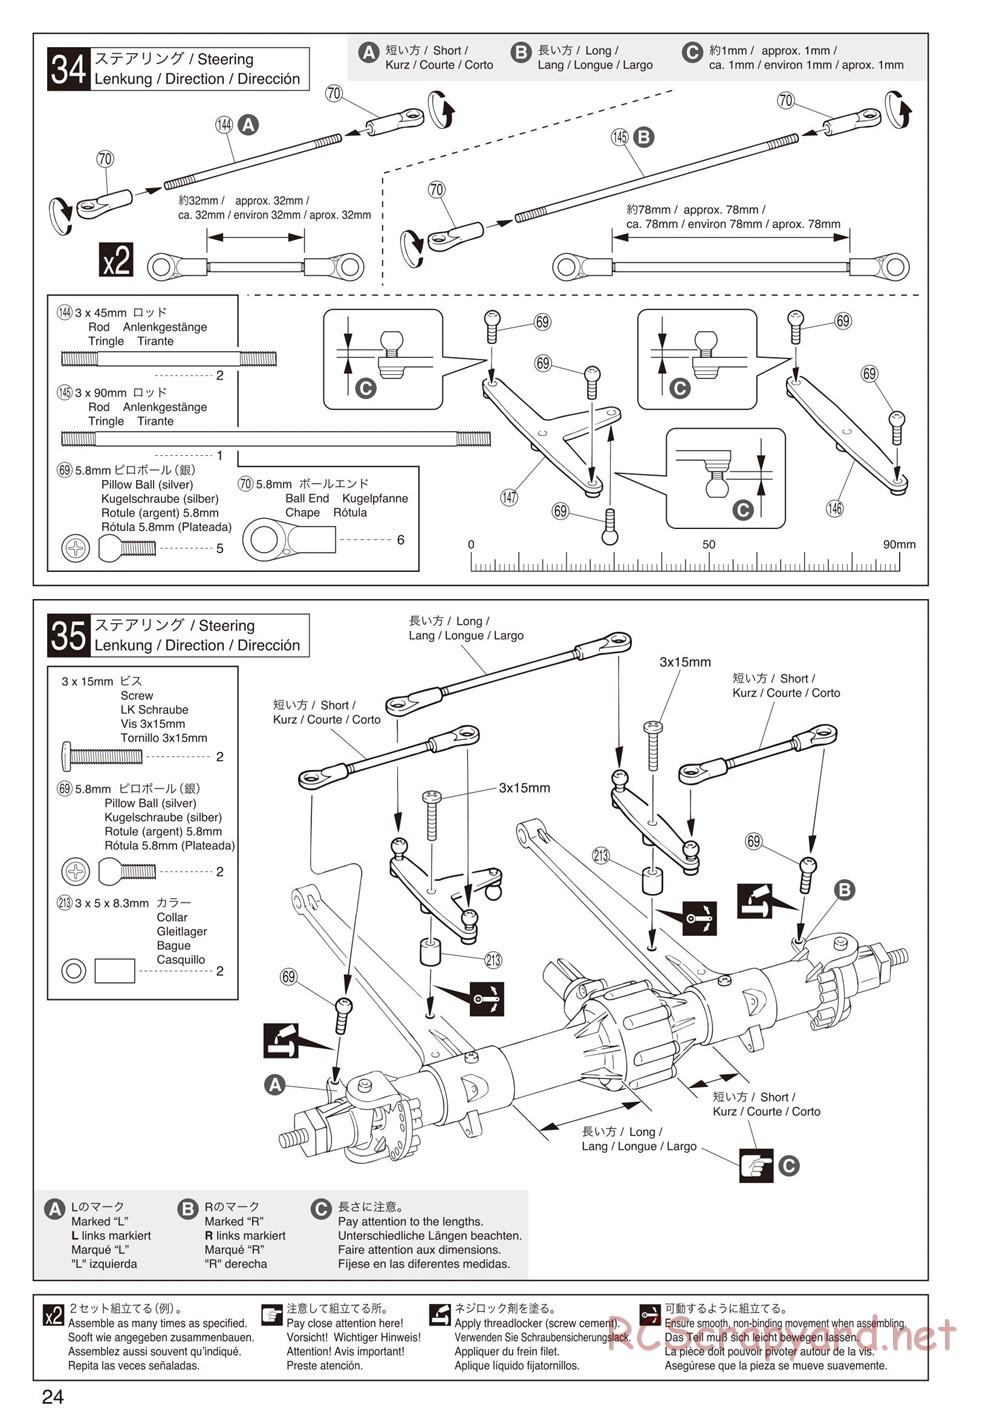 Kyosho - Mad Force Cruiser - Manual - Page 24